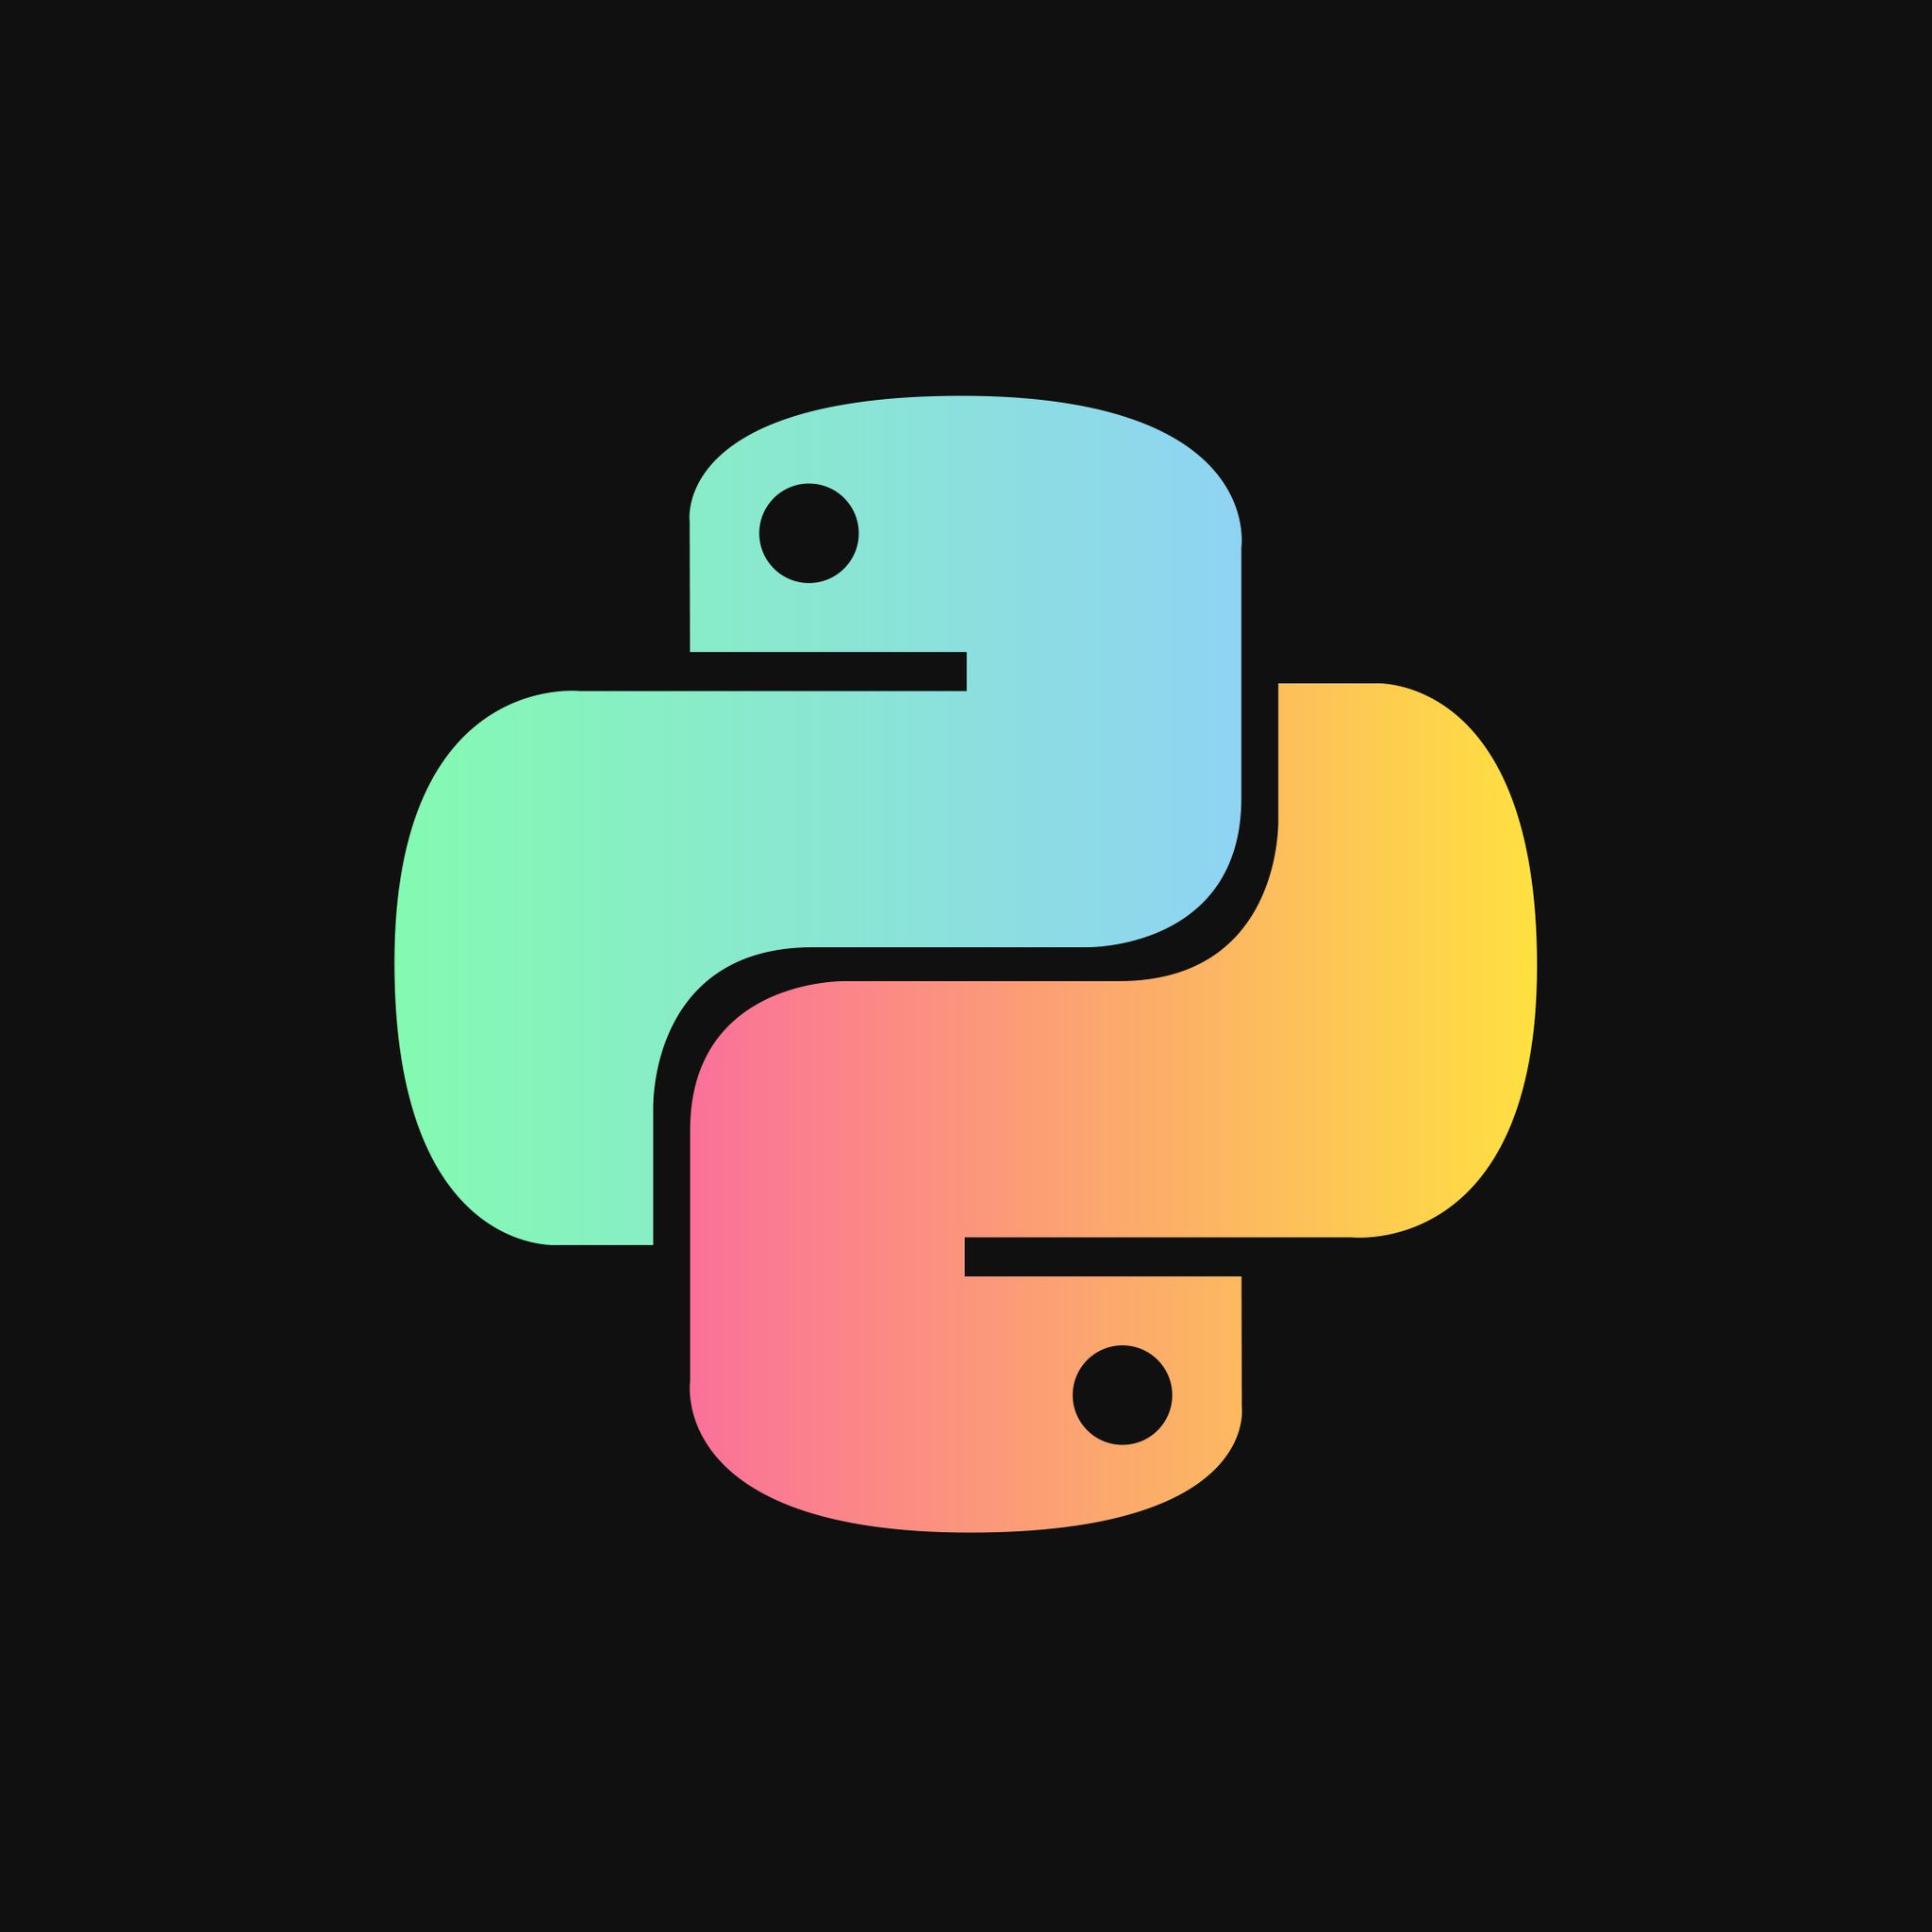 Python Logo 4k iPad Air HD 4k Wallpaper, Image, Background, Photo and Picture